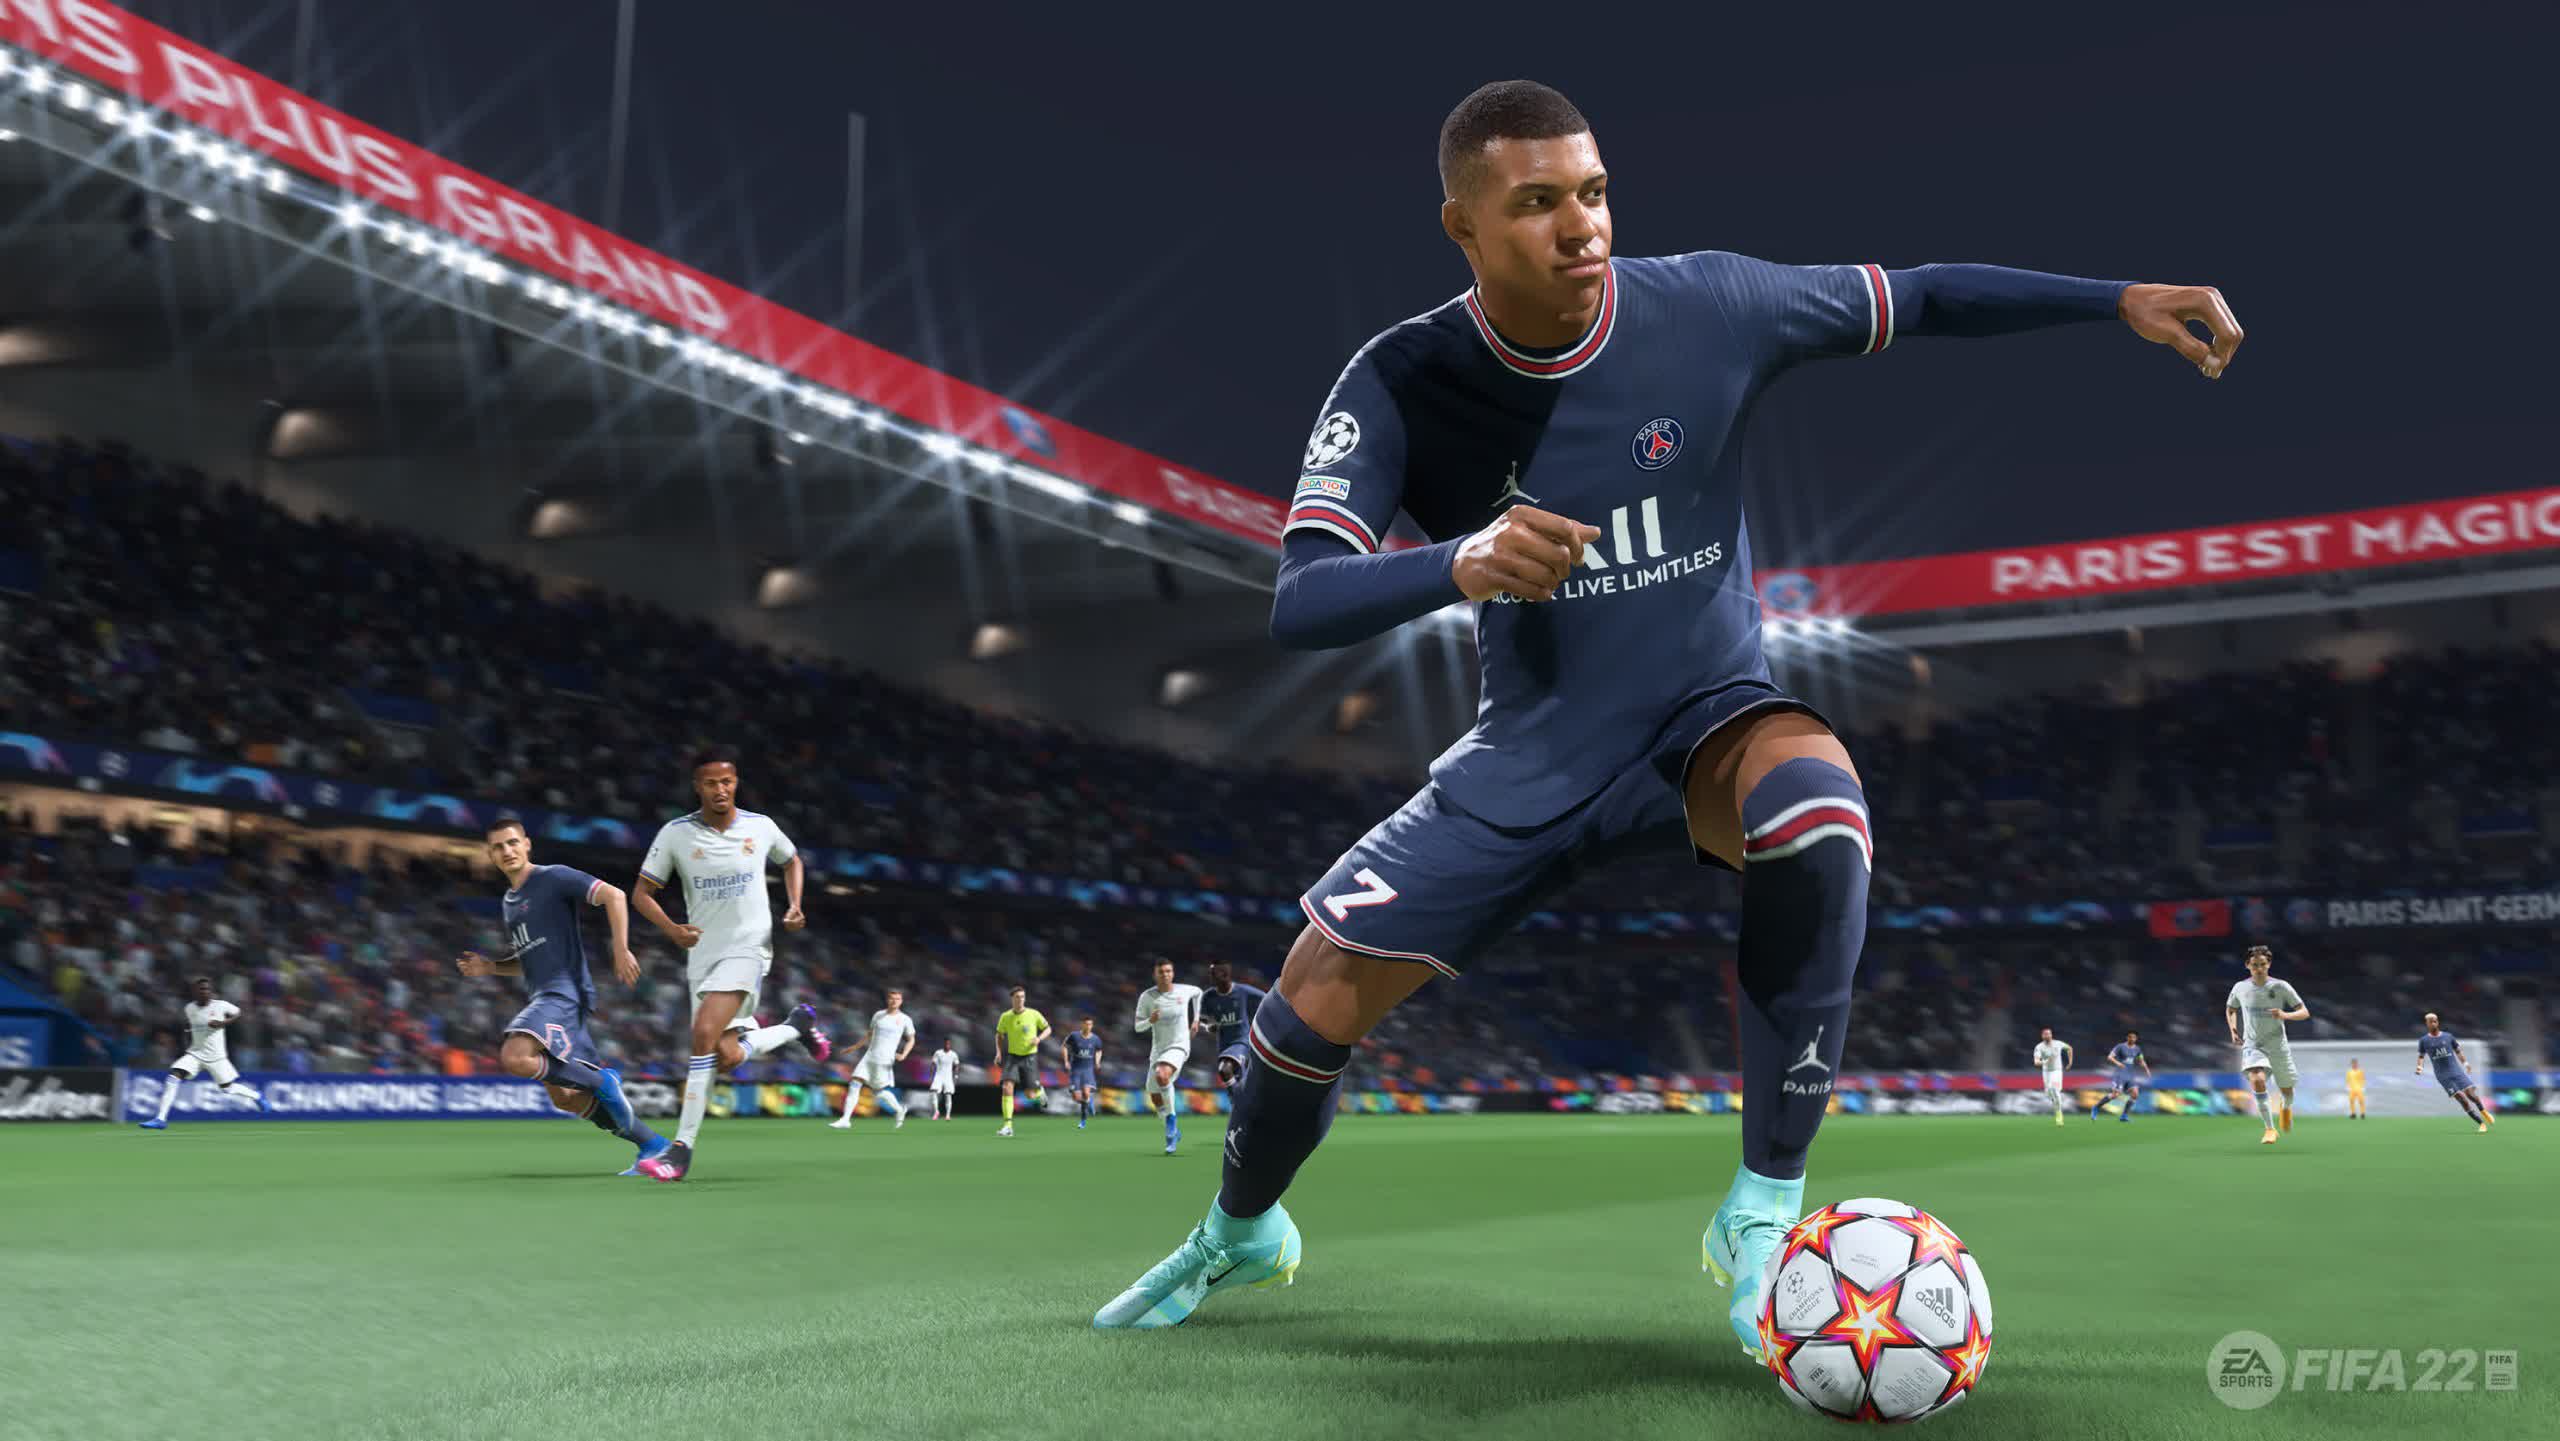 FIFA 23 and other EA titles will come with controversial kernel-mode anti-cheat software